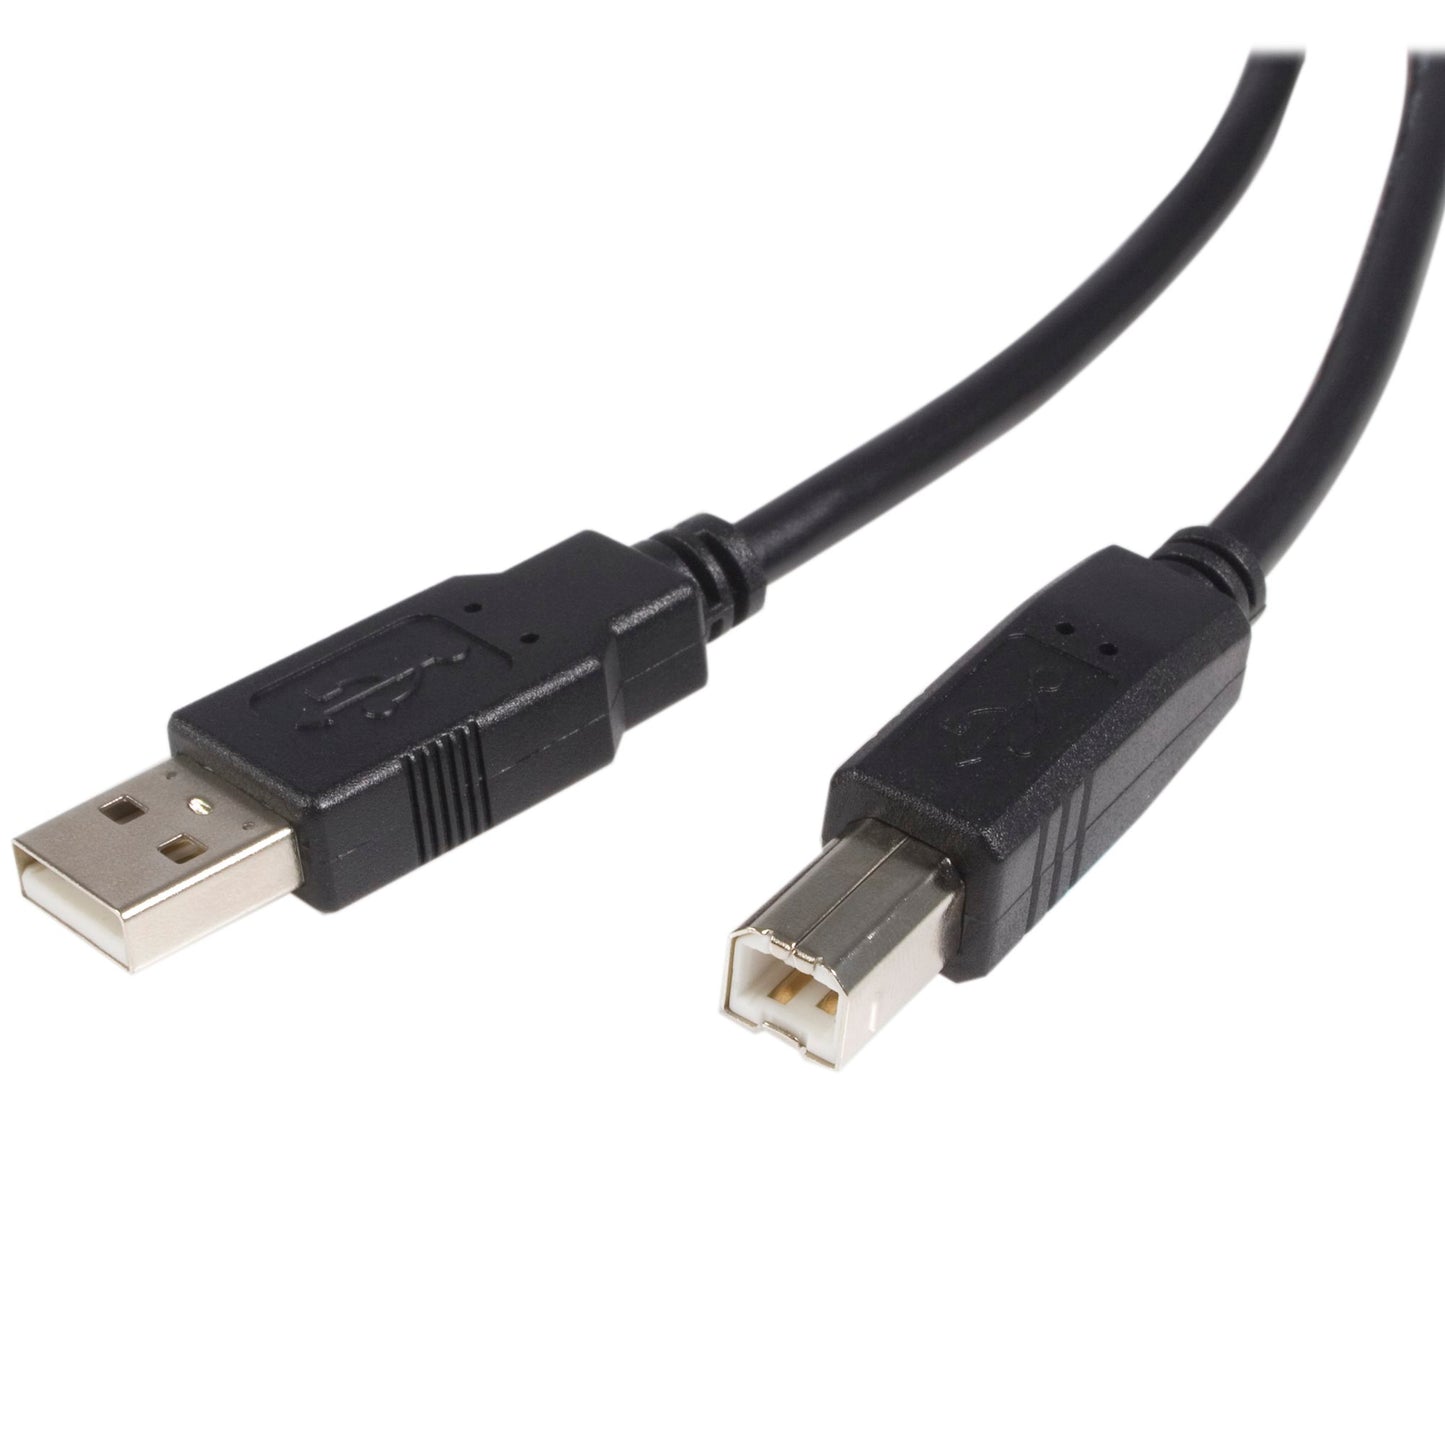 StarTech USB 2.0 Interface Cable A to B - 15ft